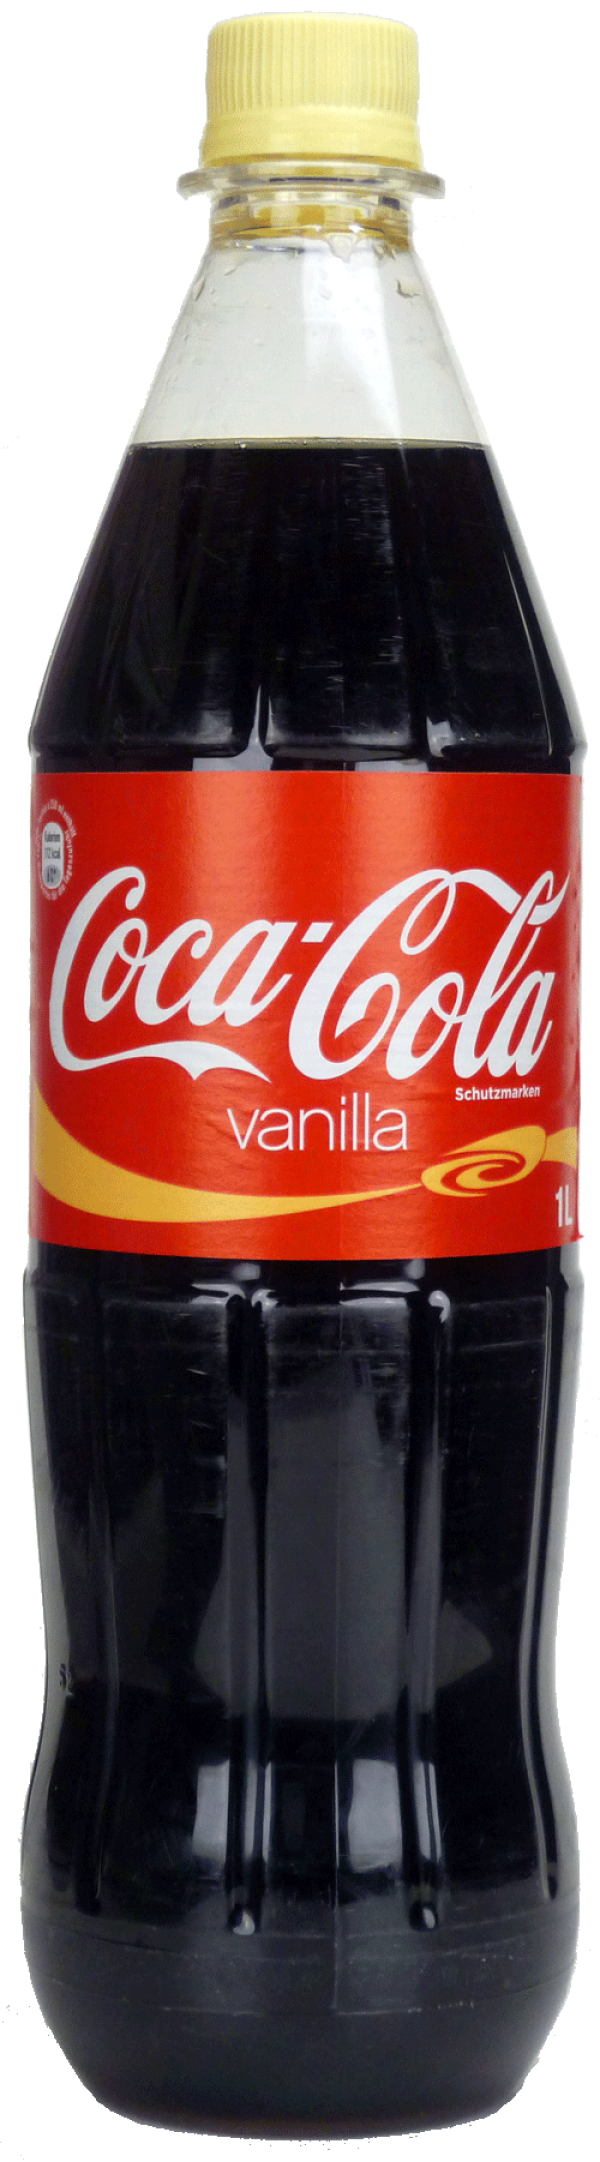 cocacola png free download 1